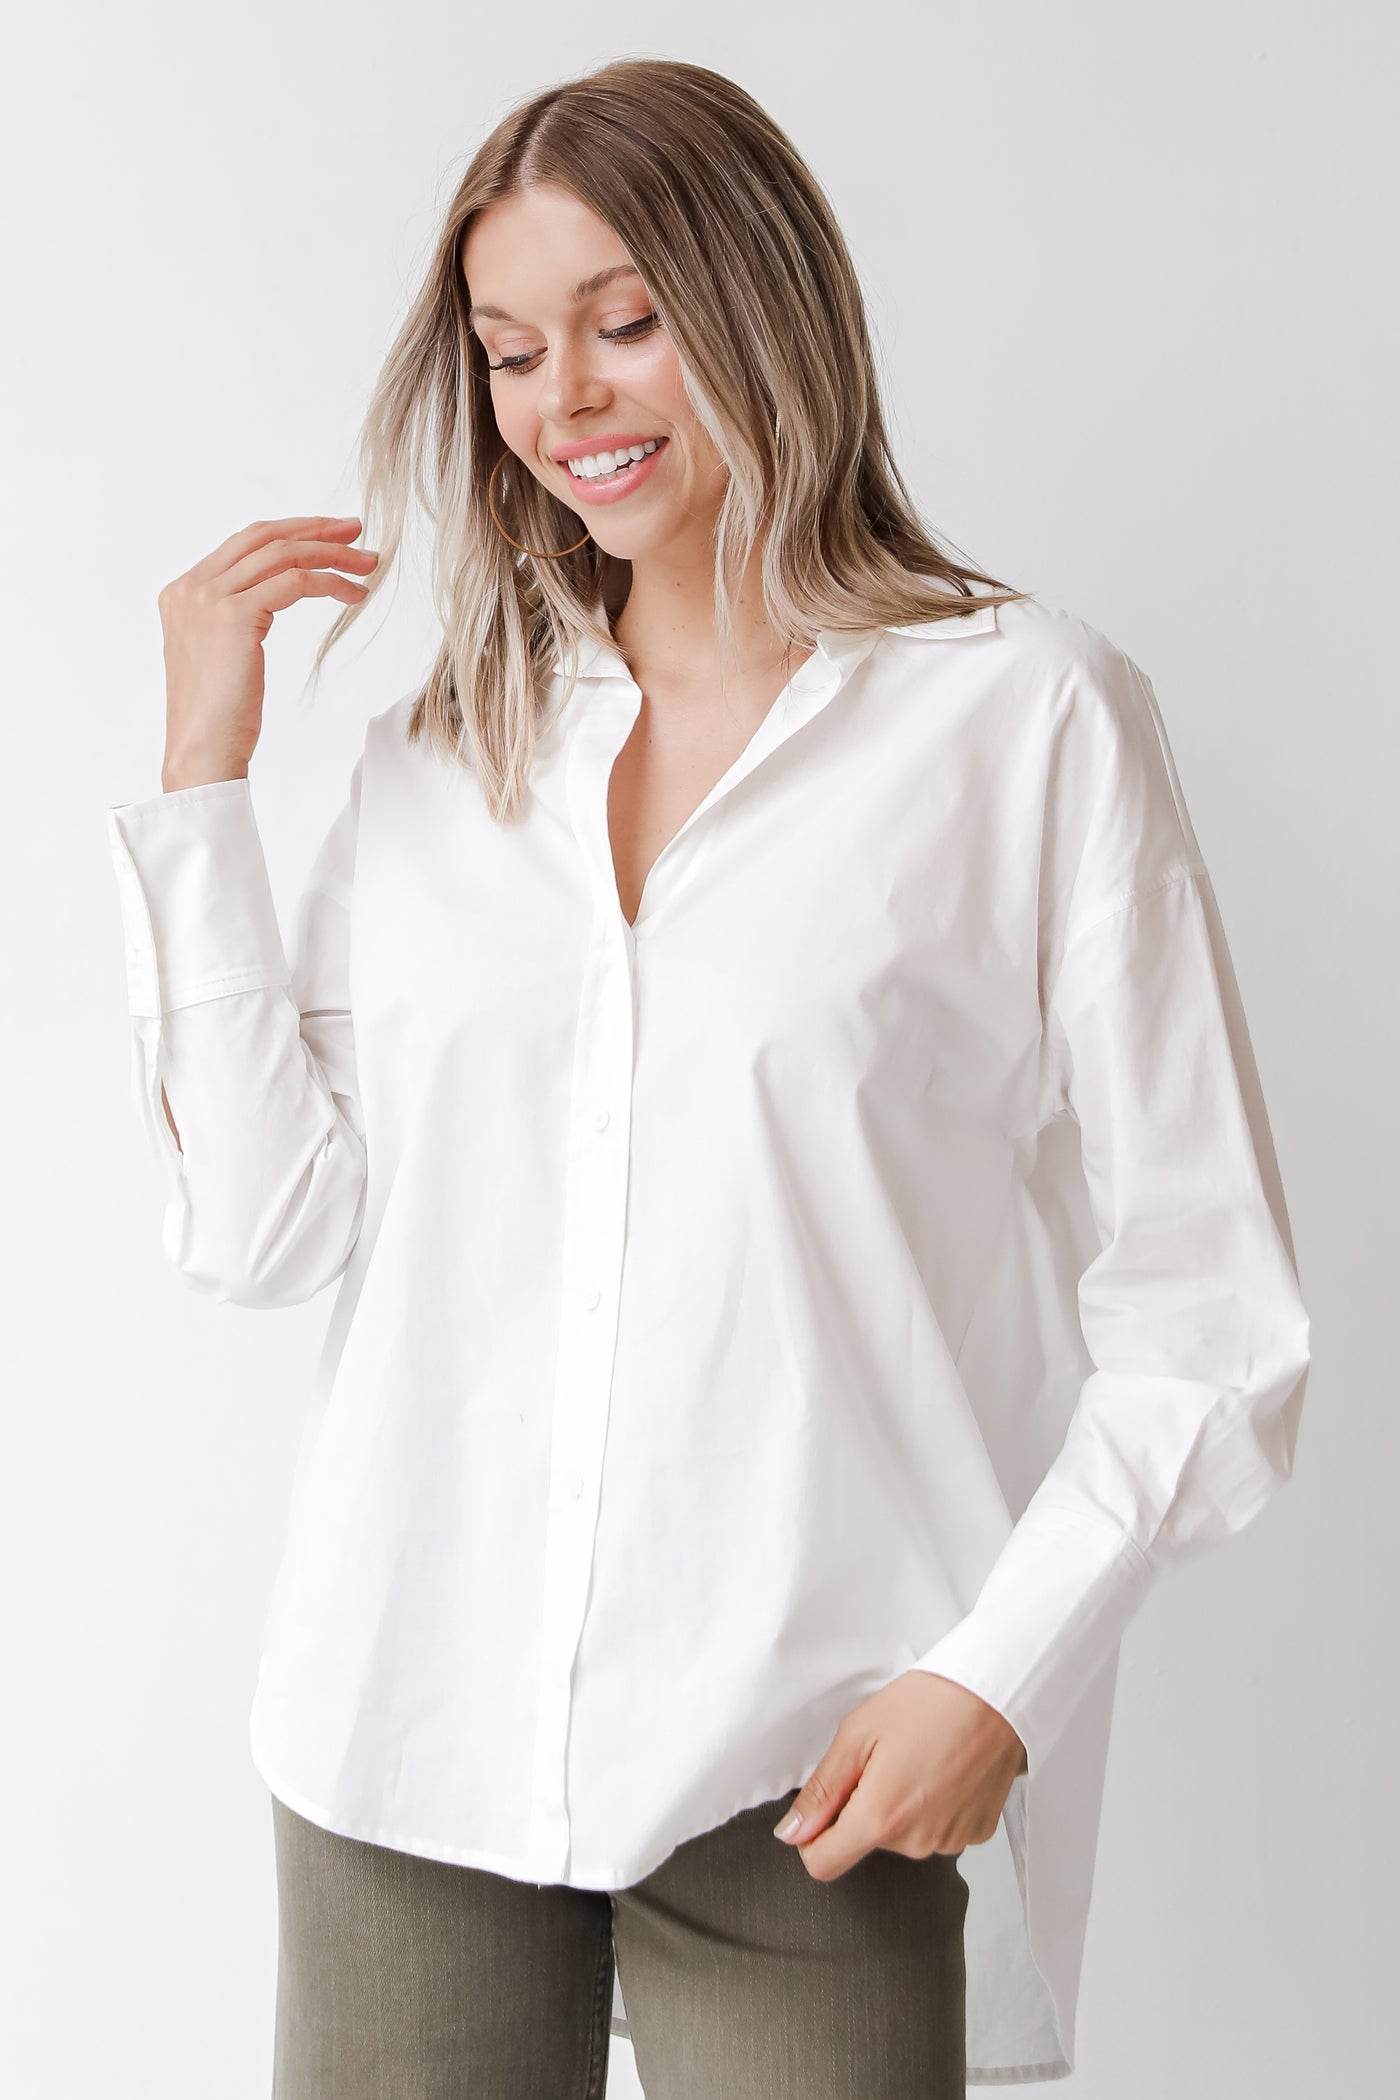 womens white button up blouse front view